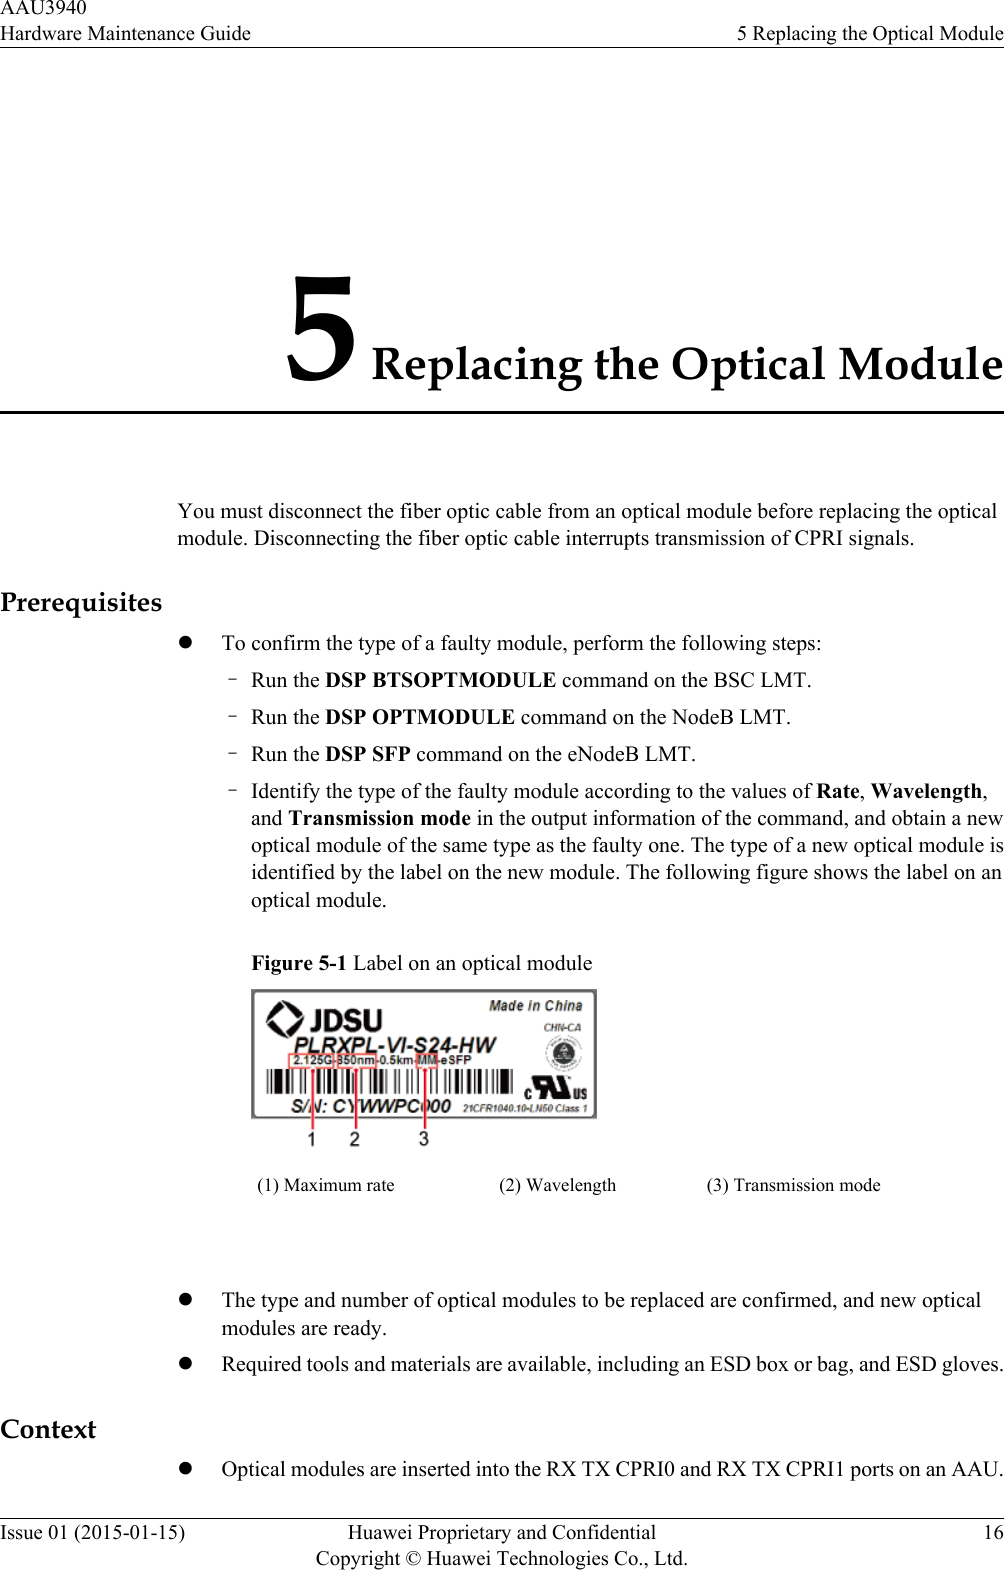 5 Replacing the Optical ModuleYou must disconnect the fiber optic cable from an optical module before replacing the opticalmodule. Disconnecting the fiber optic cable interrupts transmission of CPRI signals.PrerequisiteslTo confirm the type of a faulty module, perform the following steps:–Run the DSP BTSOPTMODULE command on the BSC LMT.–Run the DSP OPTMODULE command on the NodeB LMT.–Run the DSP SFP command on the eNodeB LMT.–Identify the type of the faulty module according to the values of Rate, Wavelength,and Transmission mode in the output information of the command, and obtain a newoptical module of the same type as the faulty one. The type of a new optical module isidentified by the label on the new module. The following figure shows the label on anoptical module.Figure 5-1 Label on an optical module(1) Maximum rate (2) Wavelength (3) Transmission mode lThe type and number of optical modules to be replaced are confirmed, and new opticalmodules are ready.lRequired tools and materials are available, including an ESD box or bag, and ESD gloves.ContextlOptical modules are inserted into the RX TX CPRI0 and RX TX CPRI1 ports on an AAU.AAU3940Hardware Maintenance Guide 5 Replacing the Optical ModuleIssue 01 (2015-01-15) Huawei Proprietary and ConfidentialCopyright © Huawei Technologies Co., Ltd.16